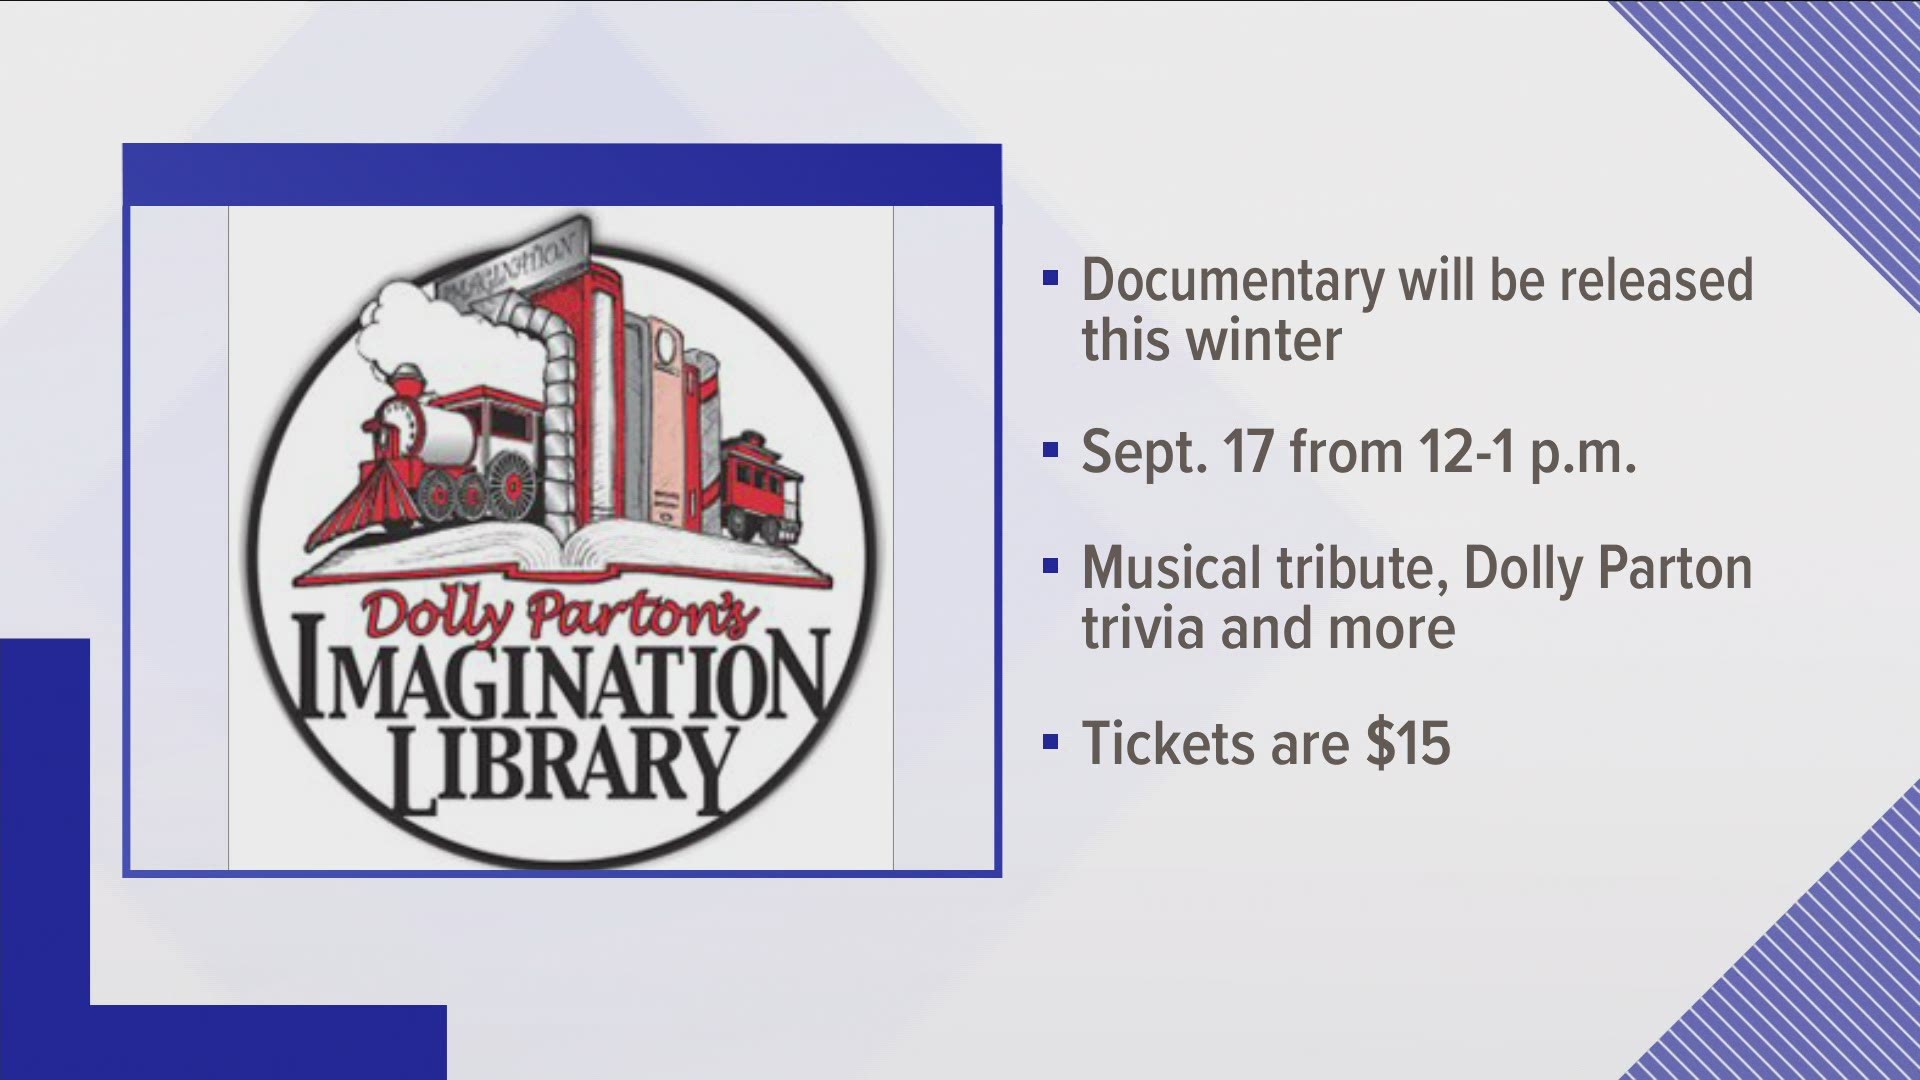 It will honor Dr. Nick Geidner, the director and producer of the documentary "The Library That Dolly Built."